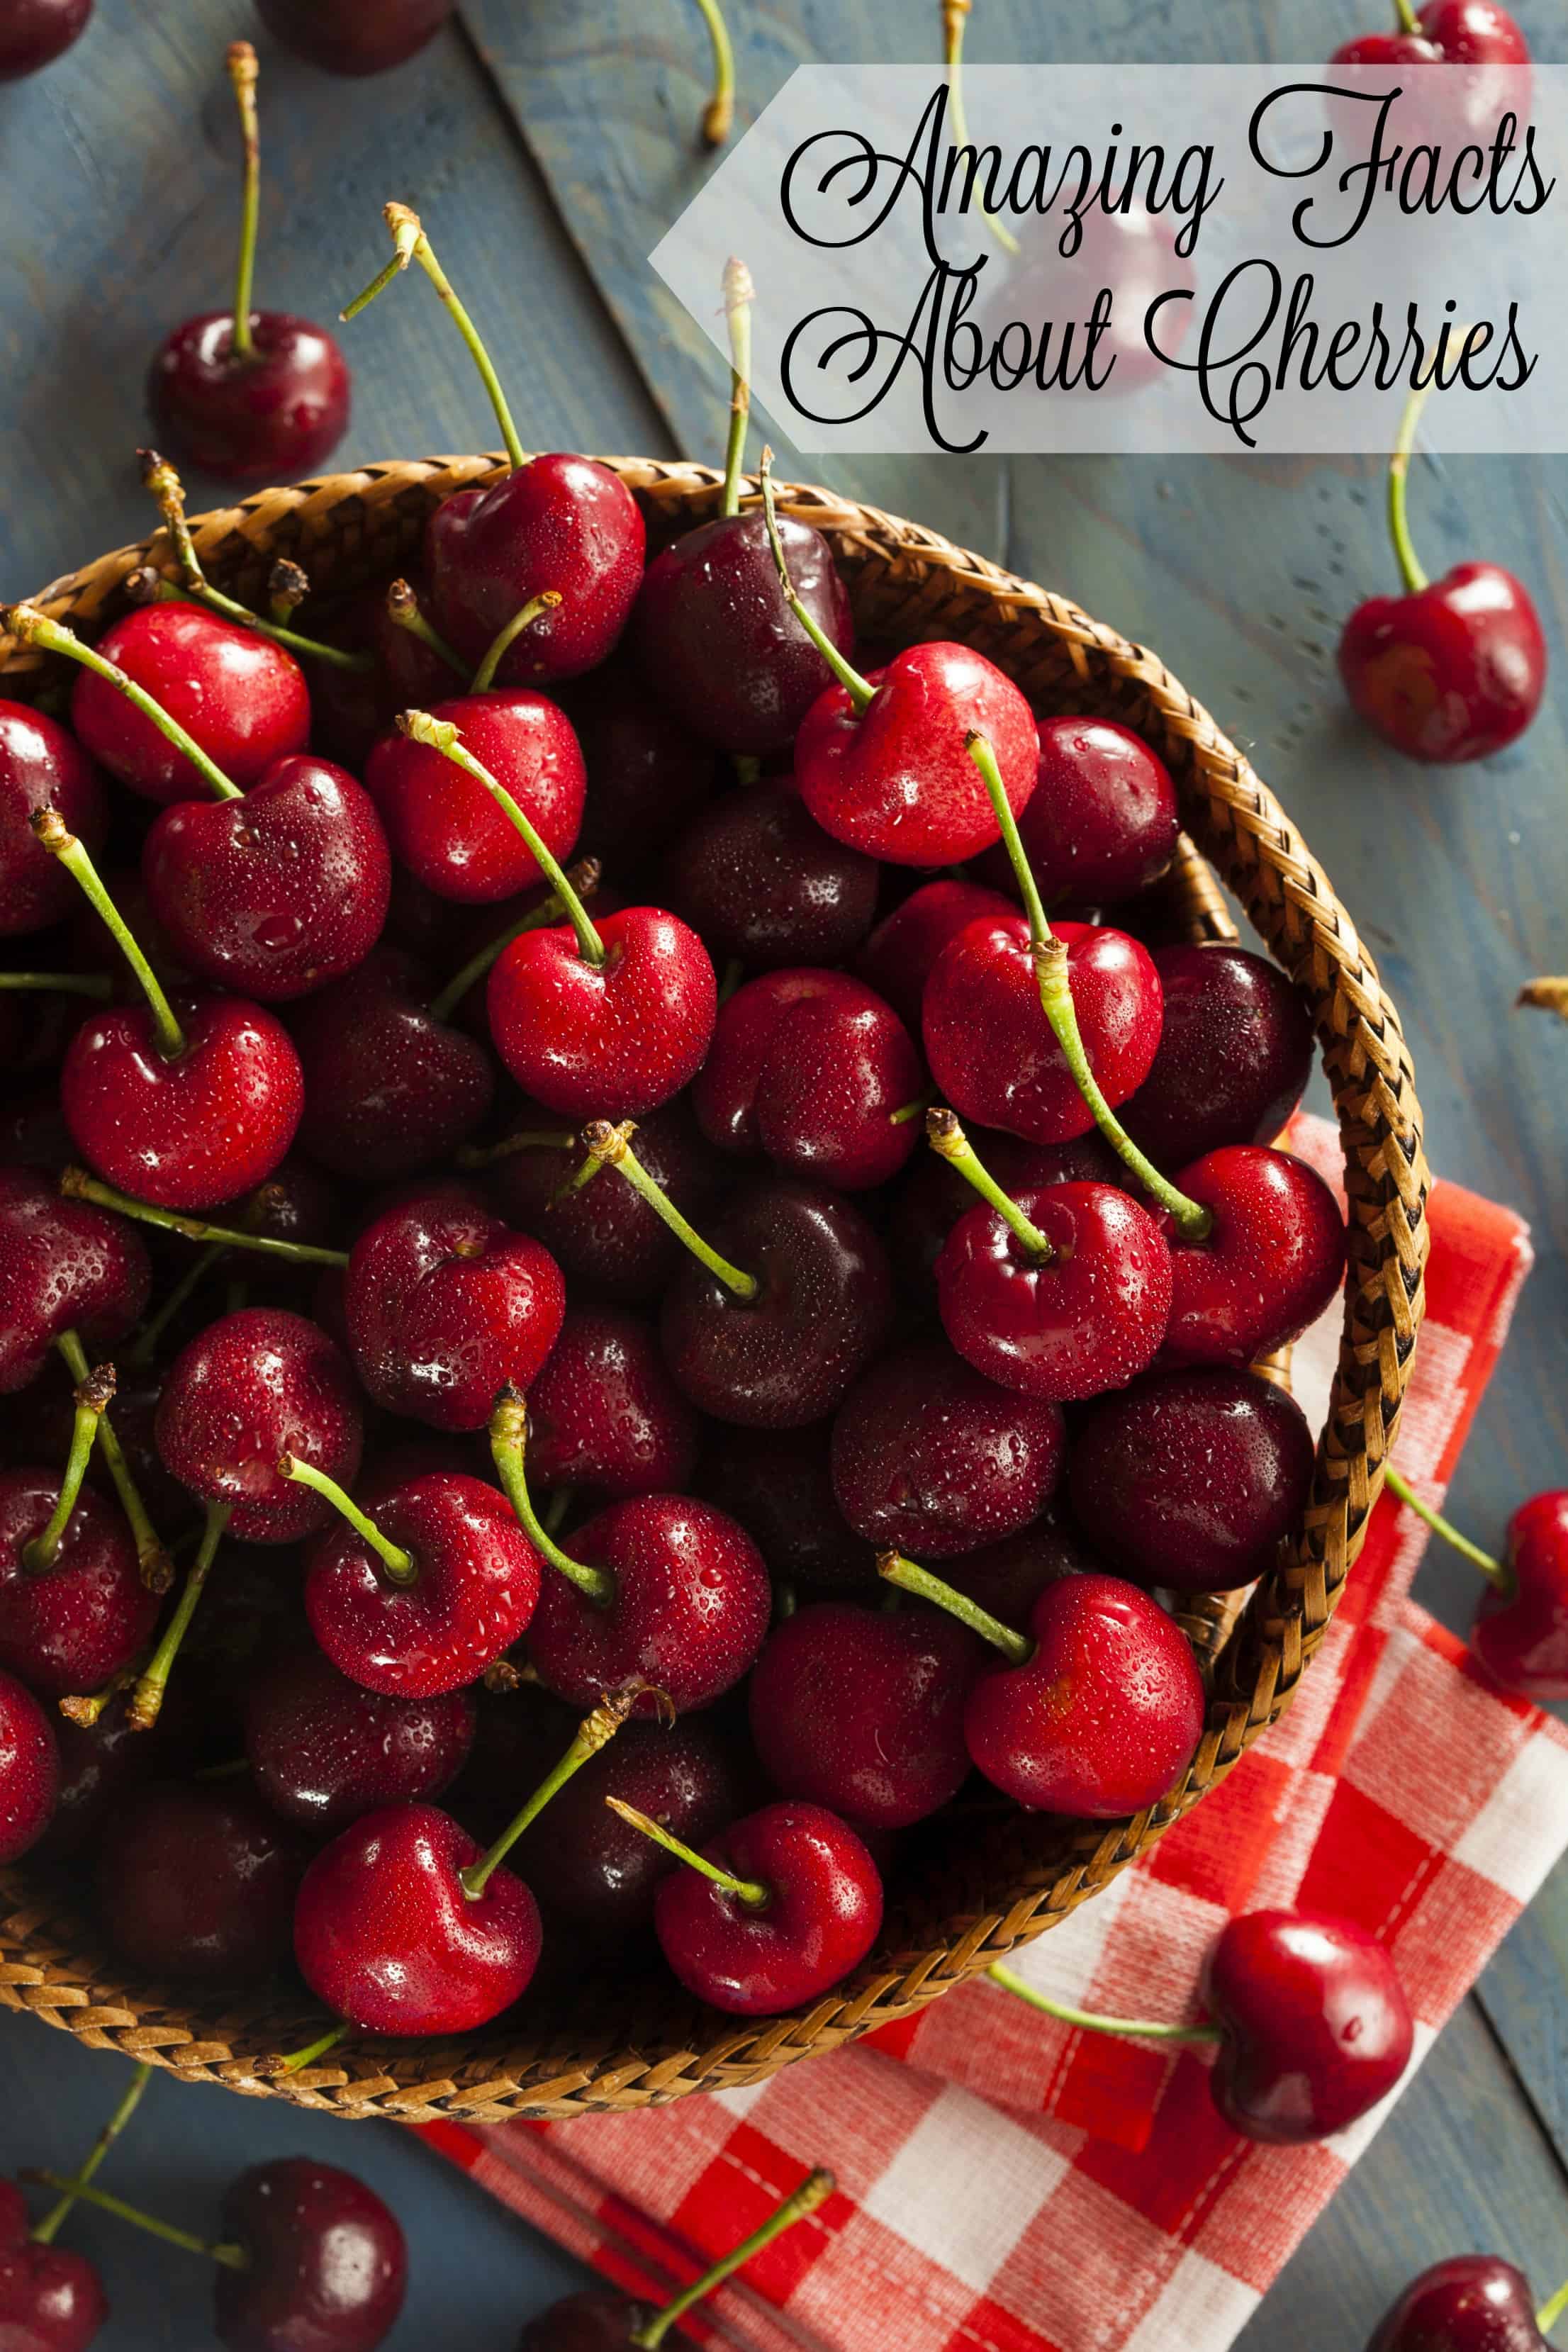 The next time you look at a cherry, you’ll appreciate it a little more because of these amazing facts about cherries. - Teaspoon Of Goodness